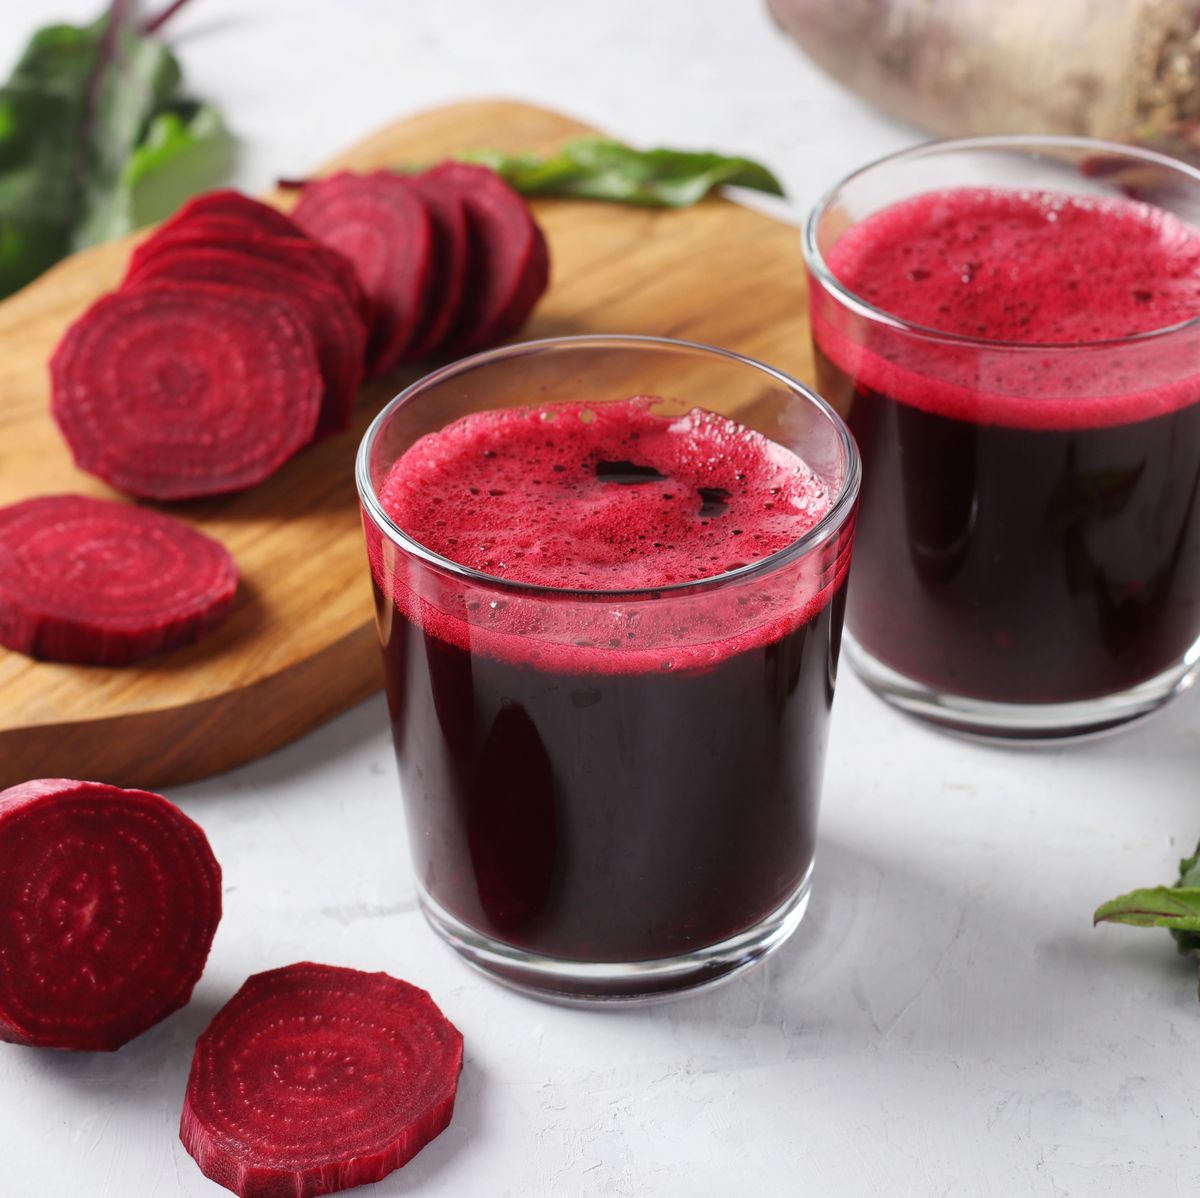 two glass of fresh beetroot juice and chopped beet on wooden board on gray background closeup